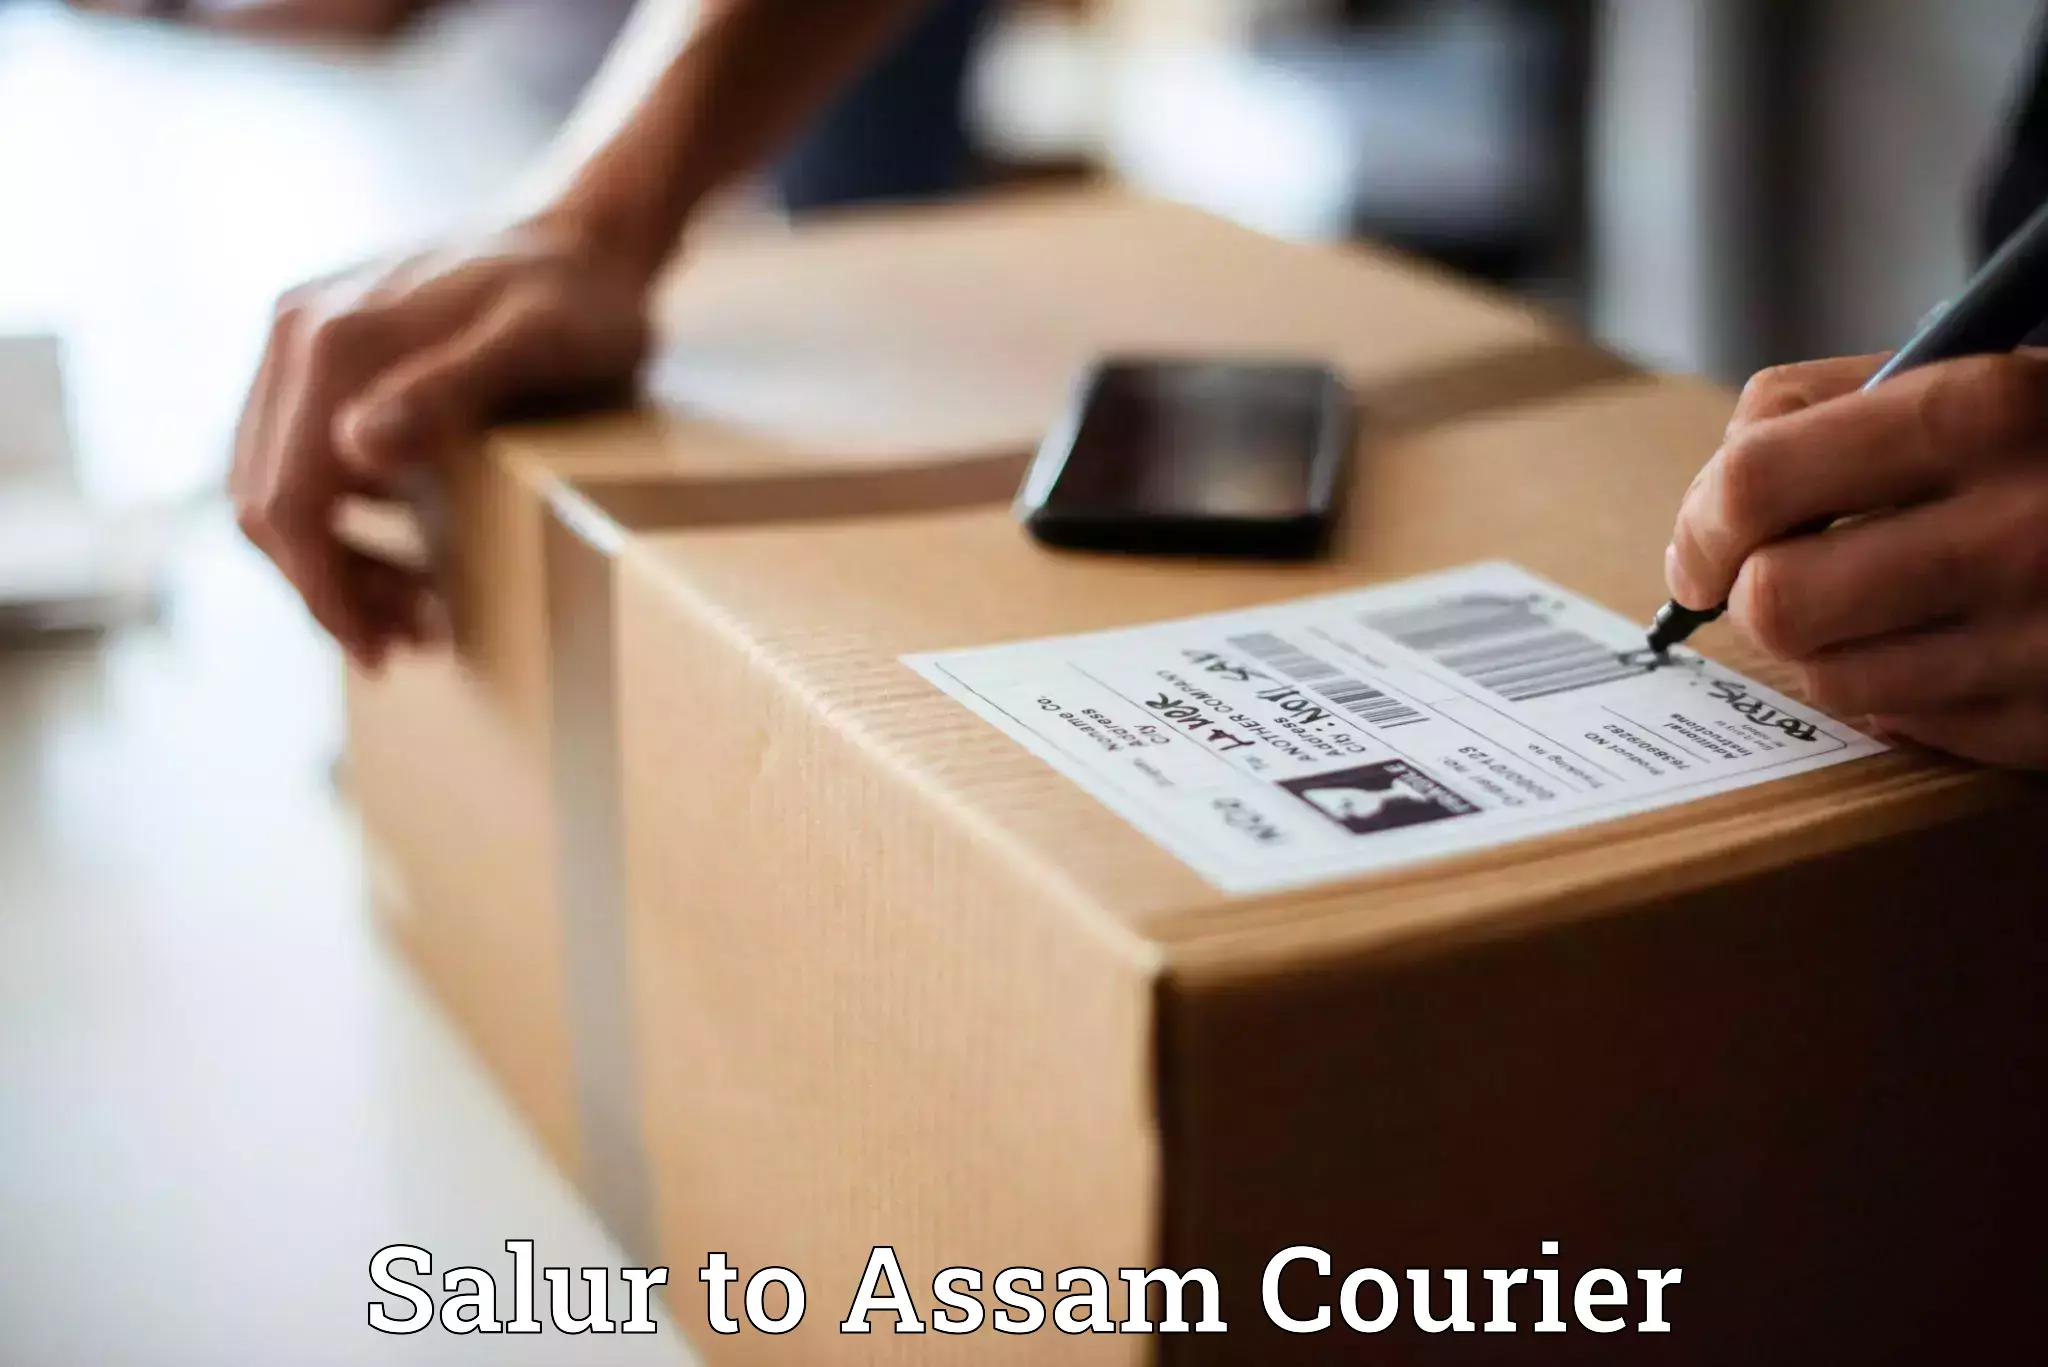 Next day courier Salur to Margherita